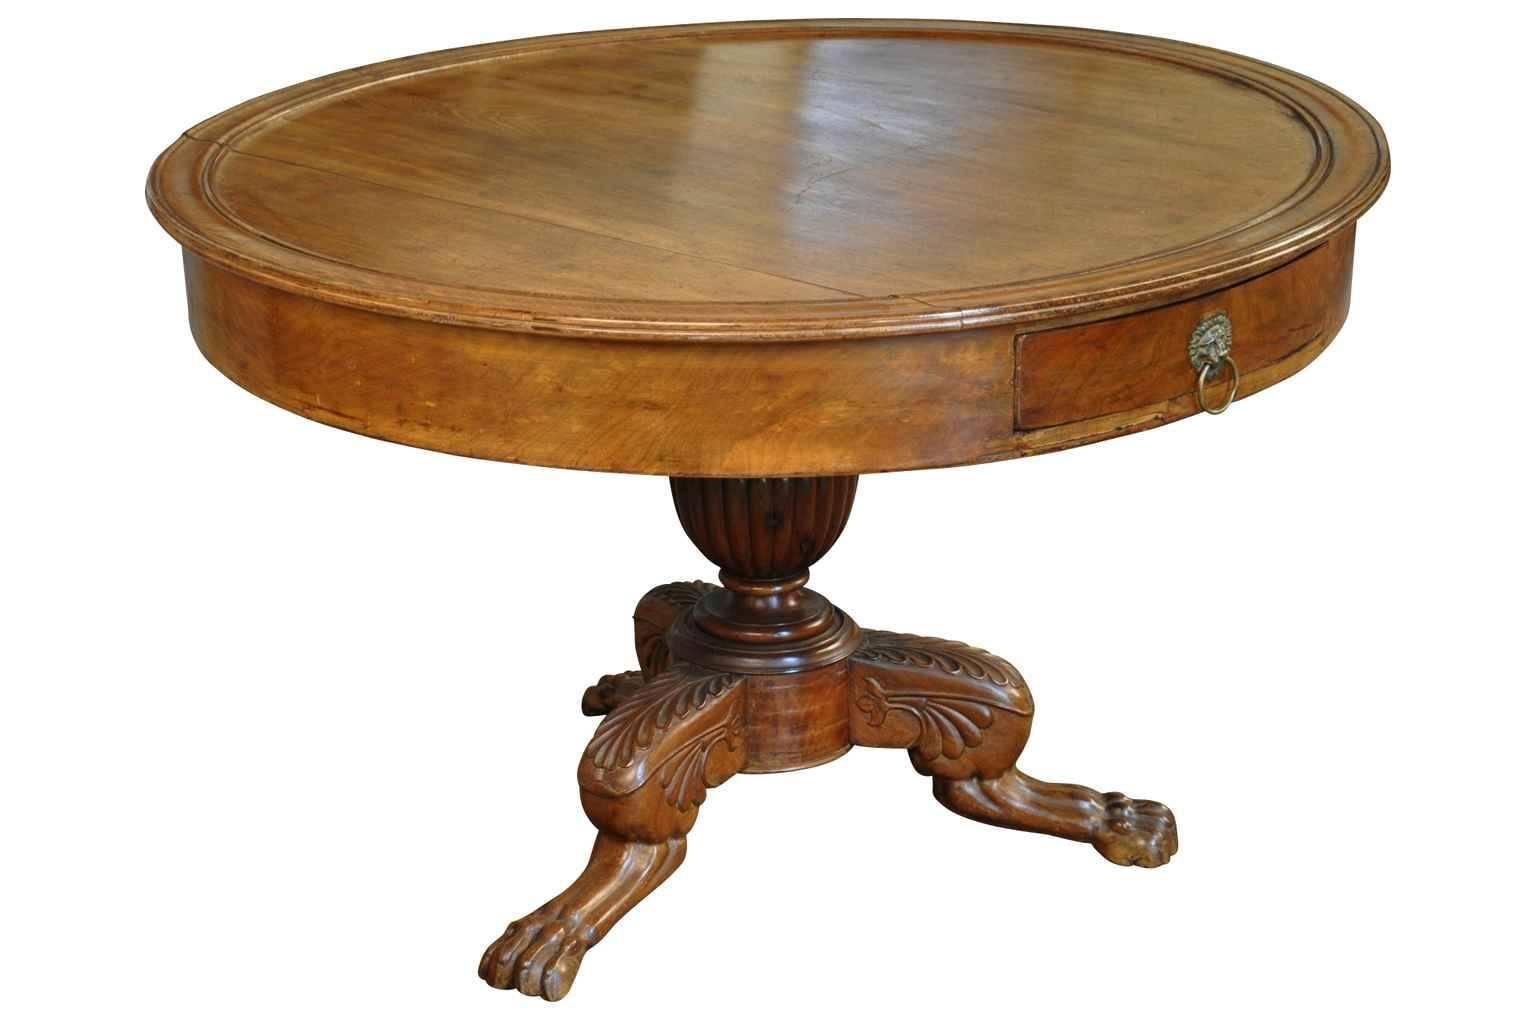 French 19th century Napoleon III style large gueridon in walnut. Handsomely constructed with a deep apron with two drawers, tripod base ending in paw feet.